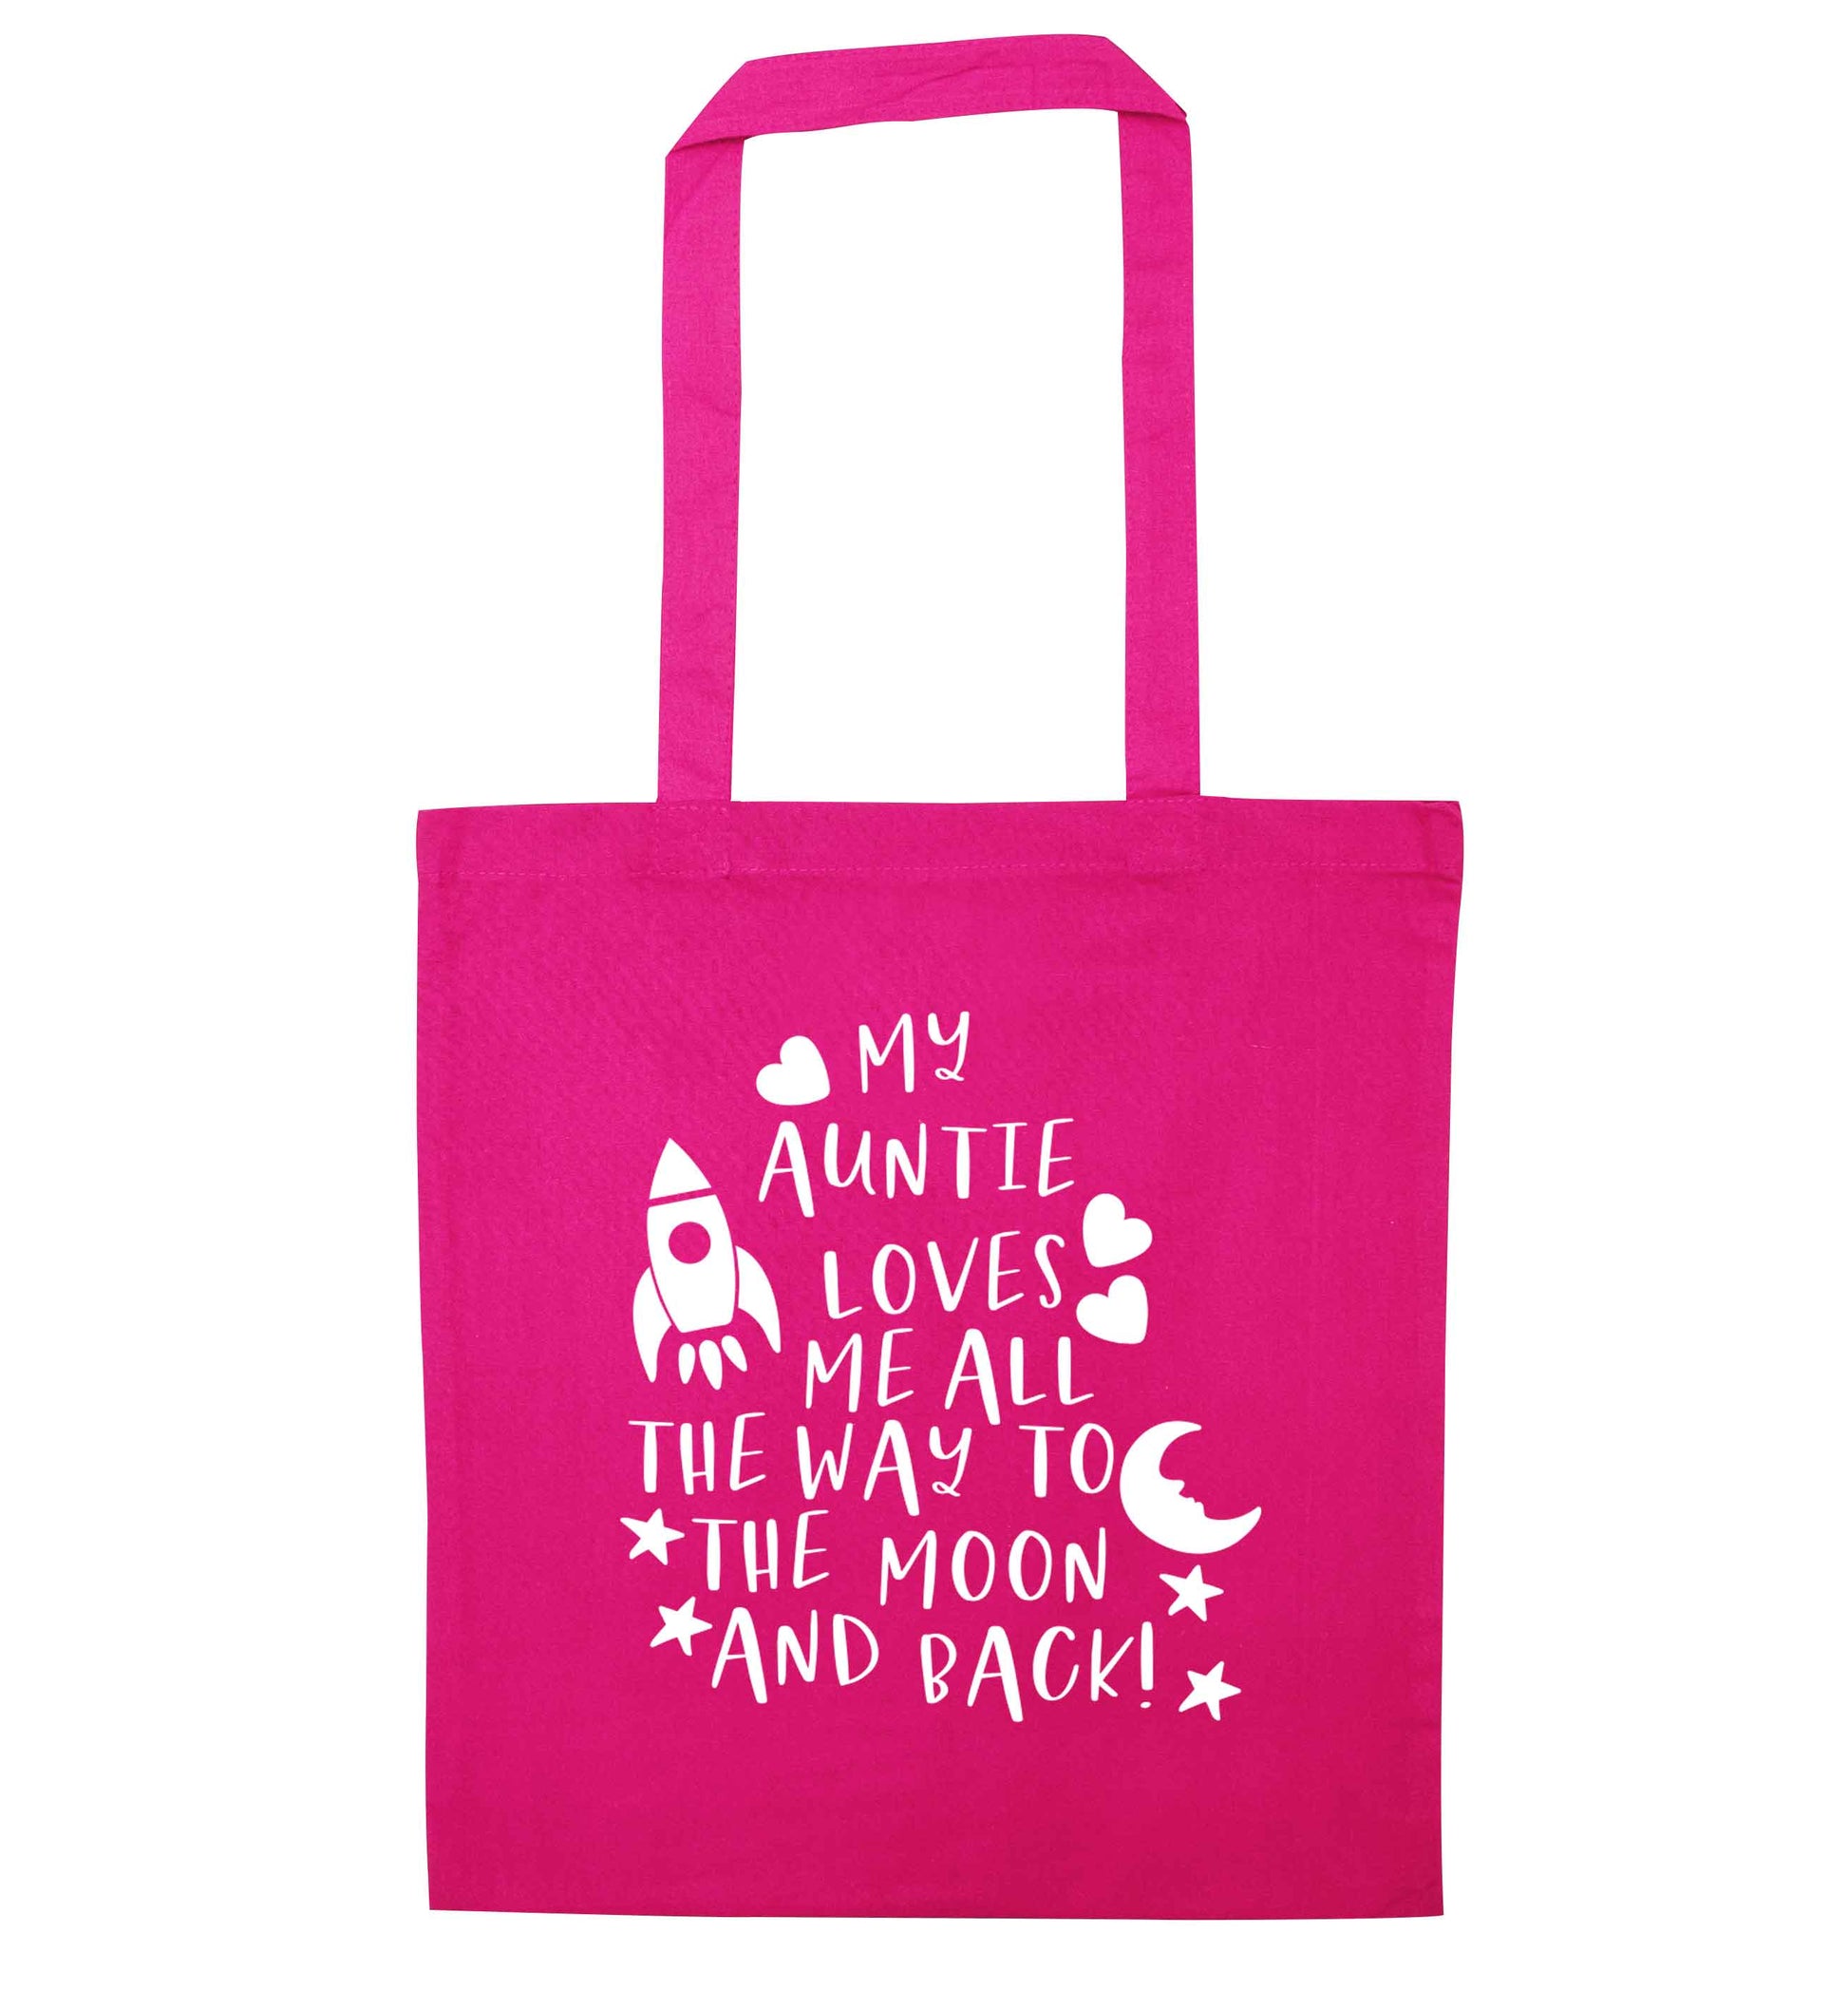 My auntie loves me all the way to the moon and back pink tote bag